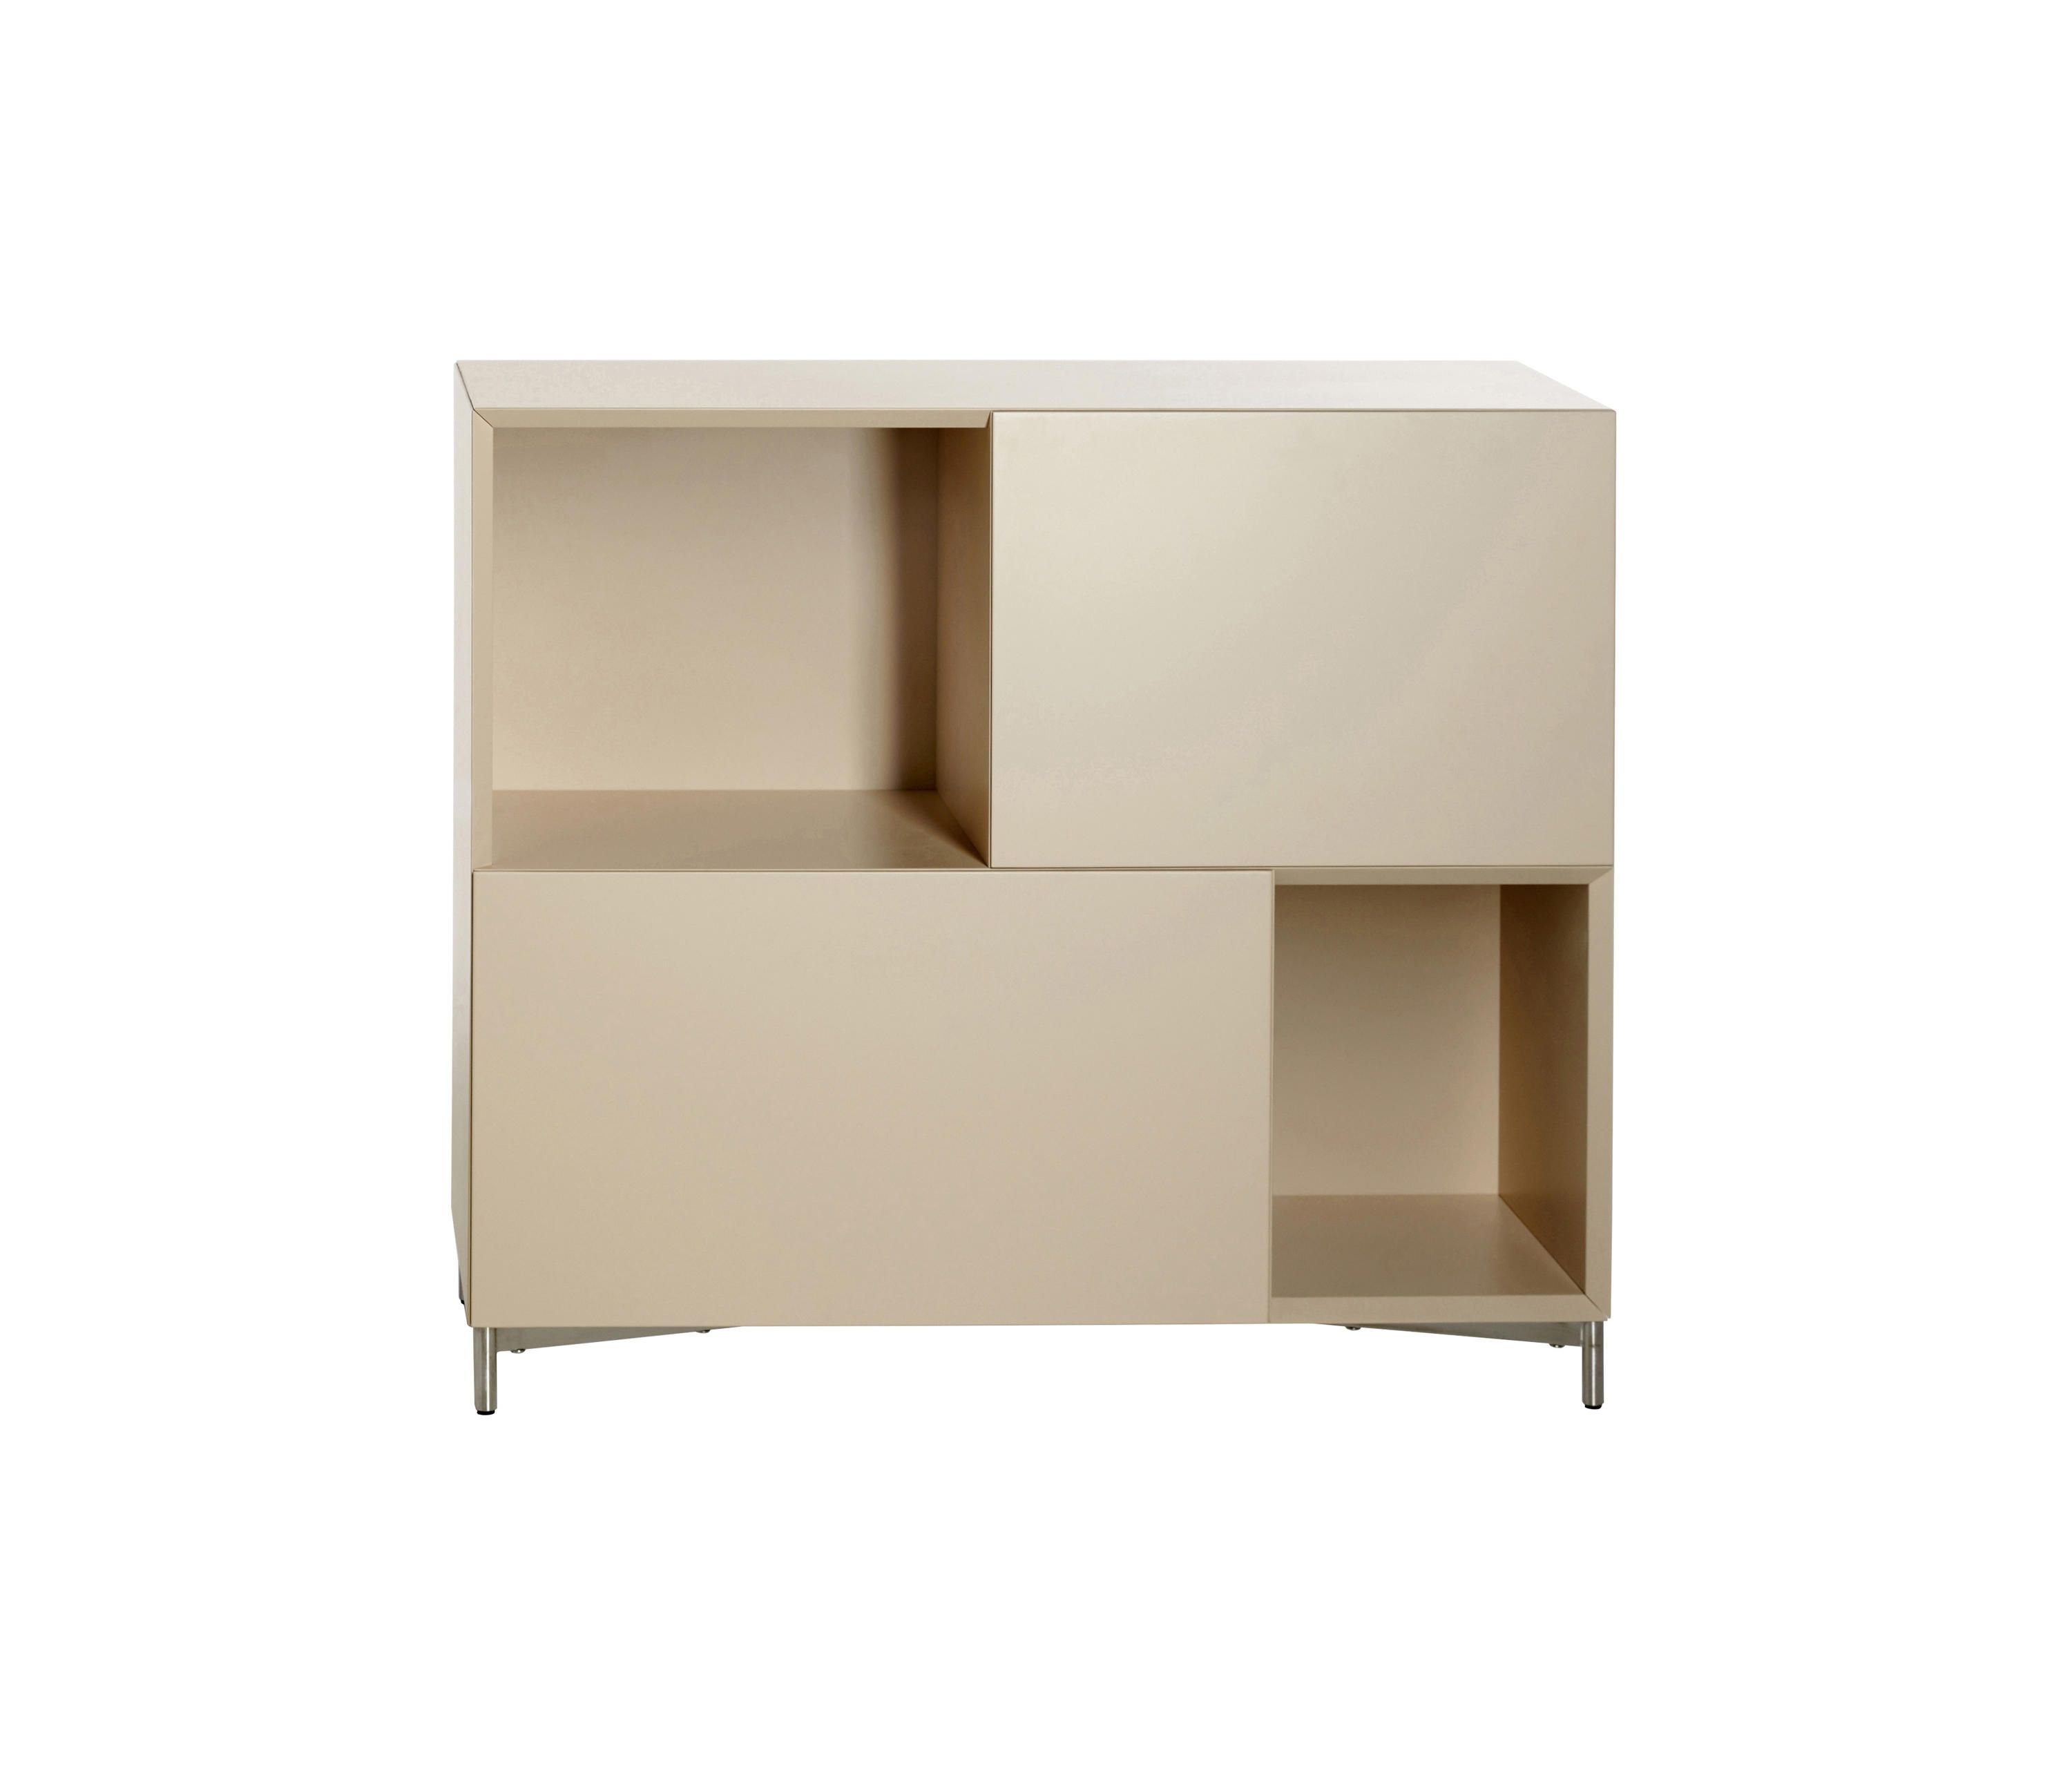 Ad Box 024/mb – Sideboards / Kommoden Von Potocco | Architonic Within Phyllis Sideboards (Photo 30 of 30)